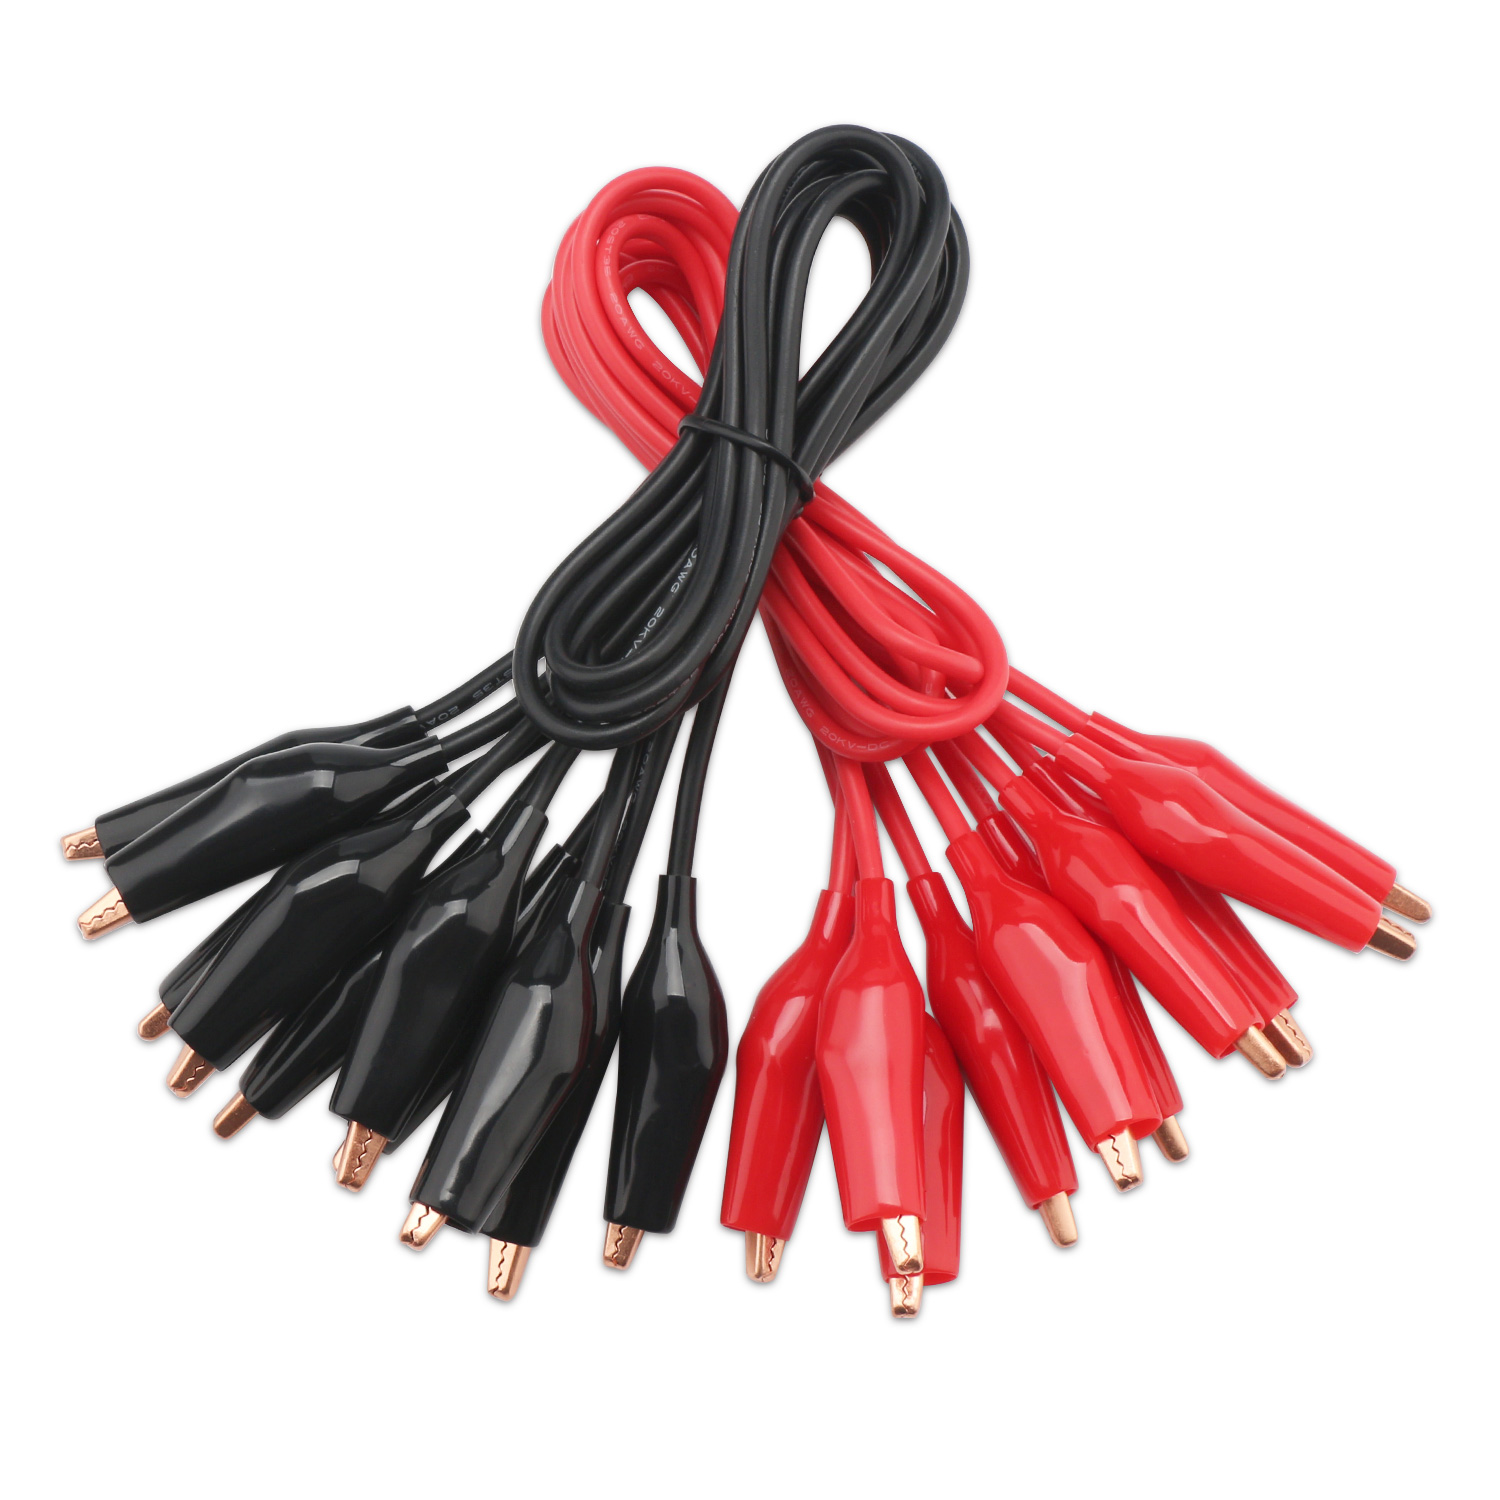 3 X 10Metered Color Insulating Test Lead Cable Set Double Ended Alligator Clips 